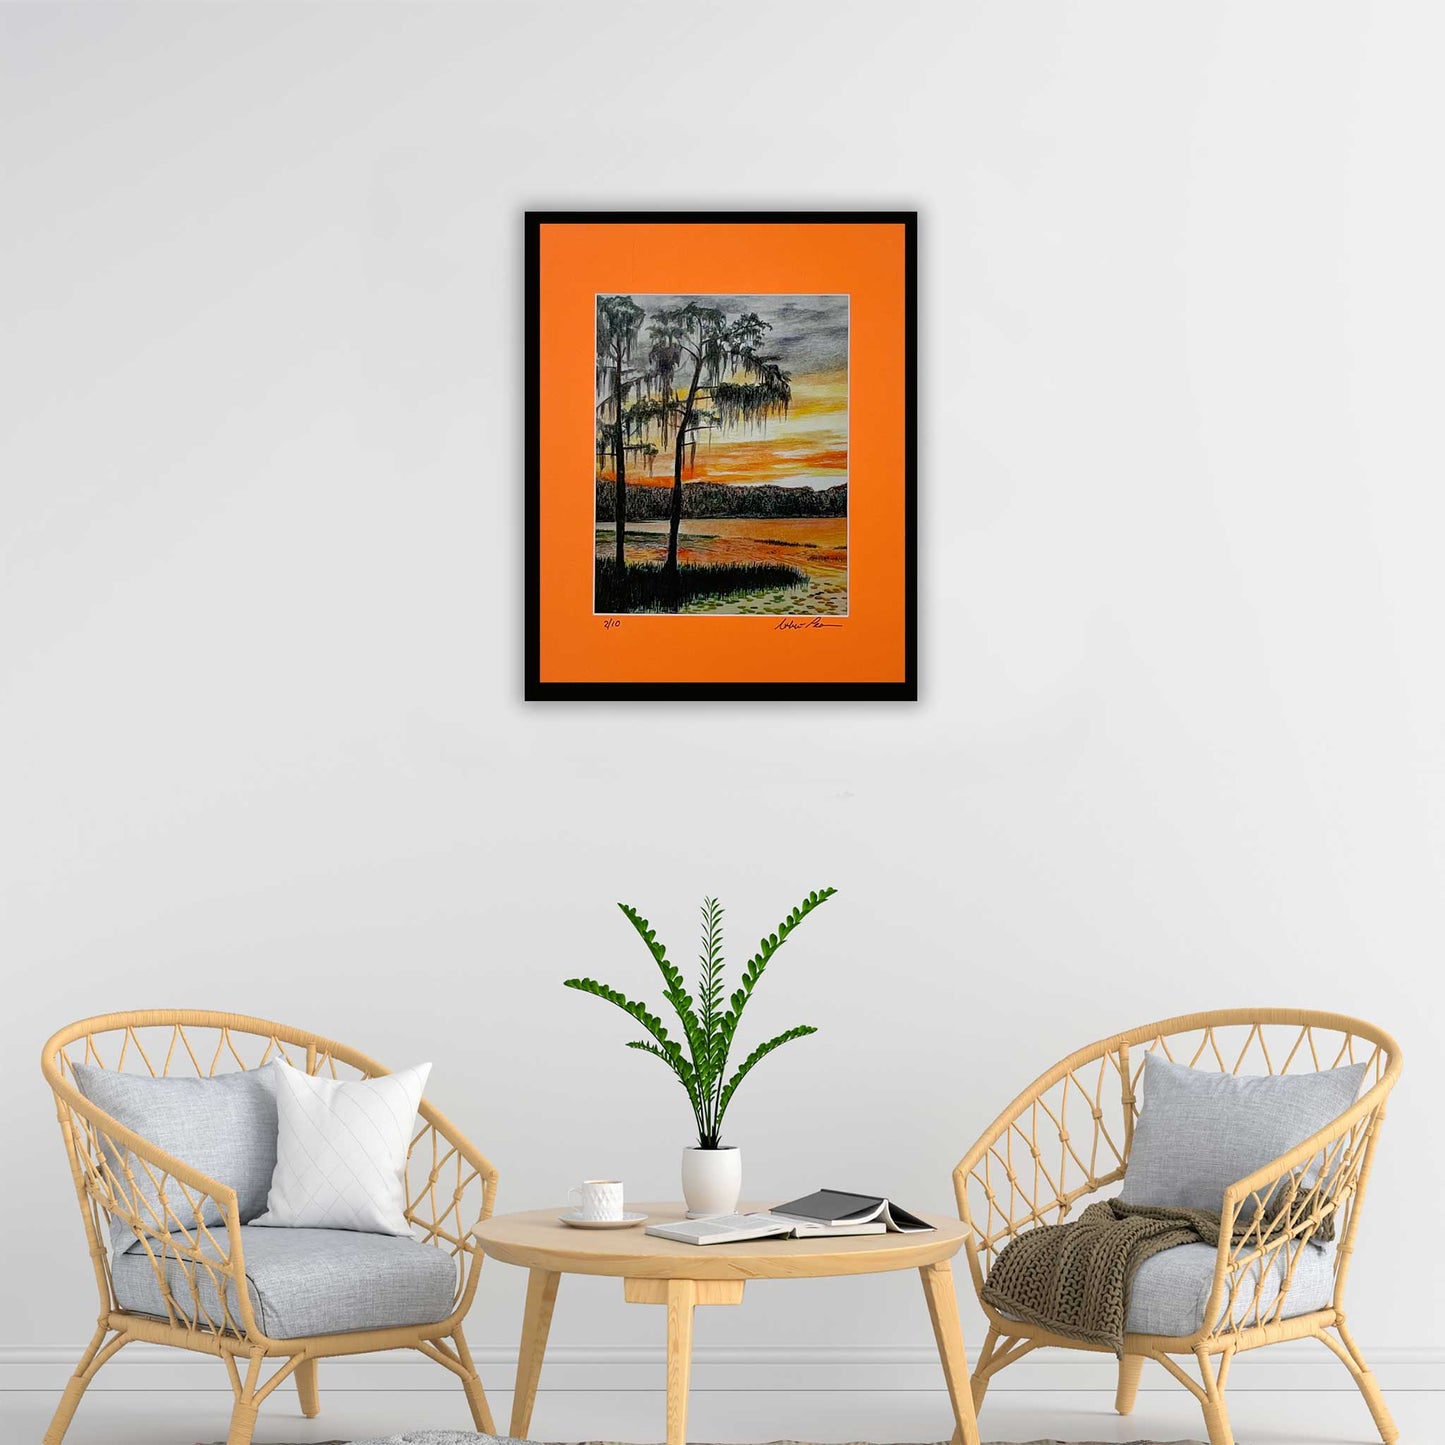 RWP Homage to Highwaymen Sunset Matted Print by Artist Robert Pearson, Florida's Lake Louisa State Park, Beautiful Sunset of Lake Dixie, Two Moss Covered Trees in the Orange Glow of Sunset, 11 x 14" matted Print